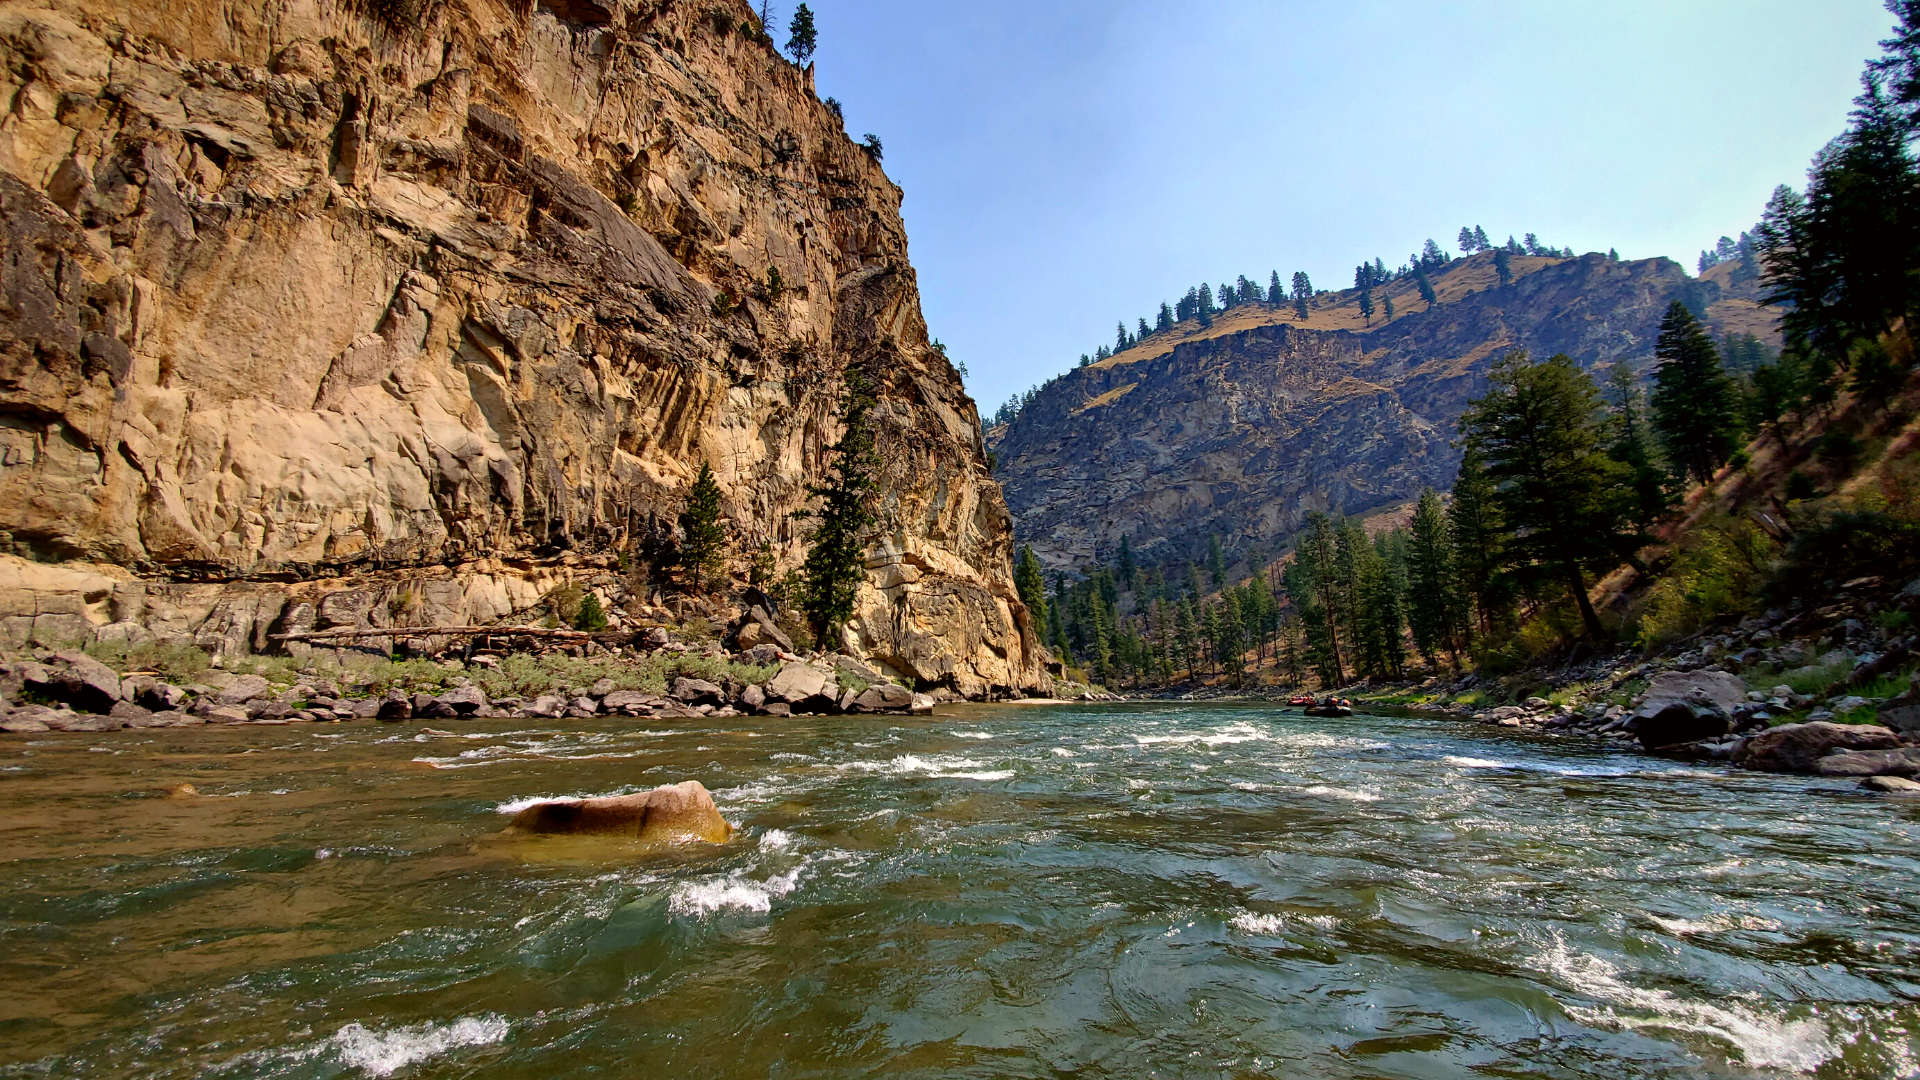 Waters of the Middle Fork of the Salmon River, Idaho in mid-August.